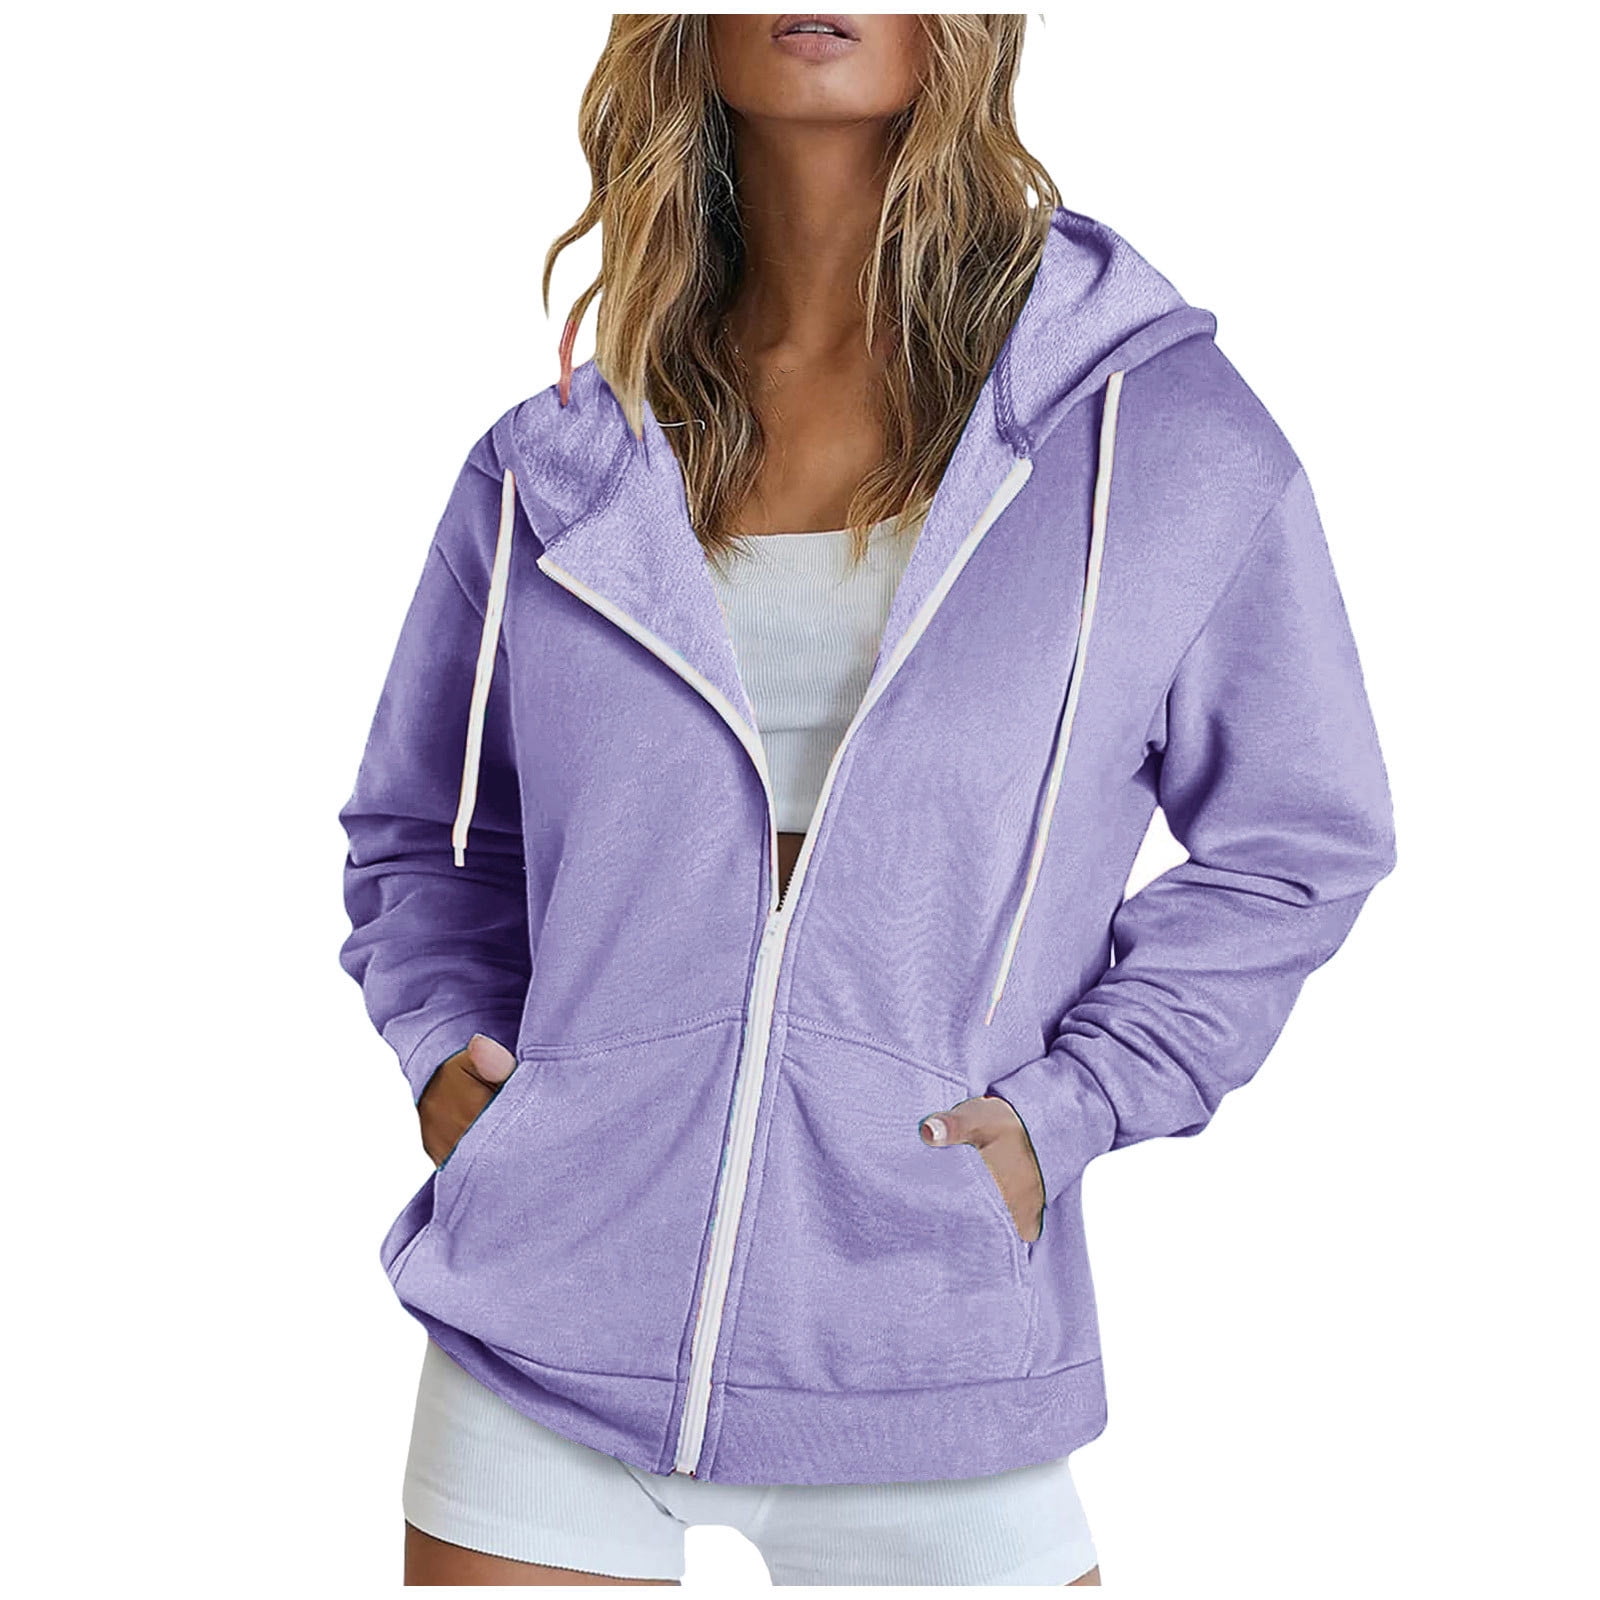 Full Zip-up Jackets with Pockets for Women Cotton Fleece Plain Hoodie ...